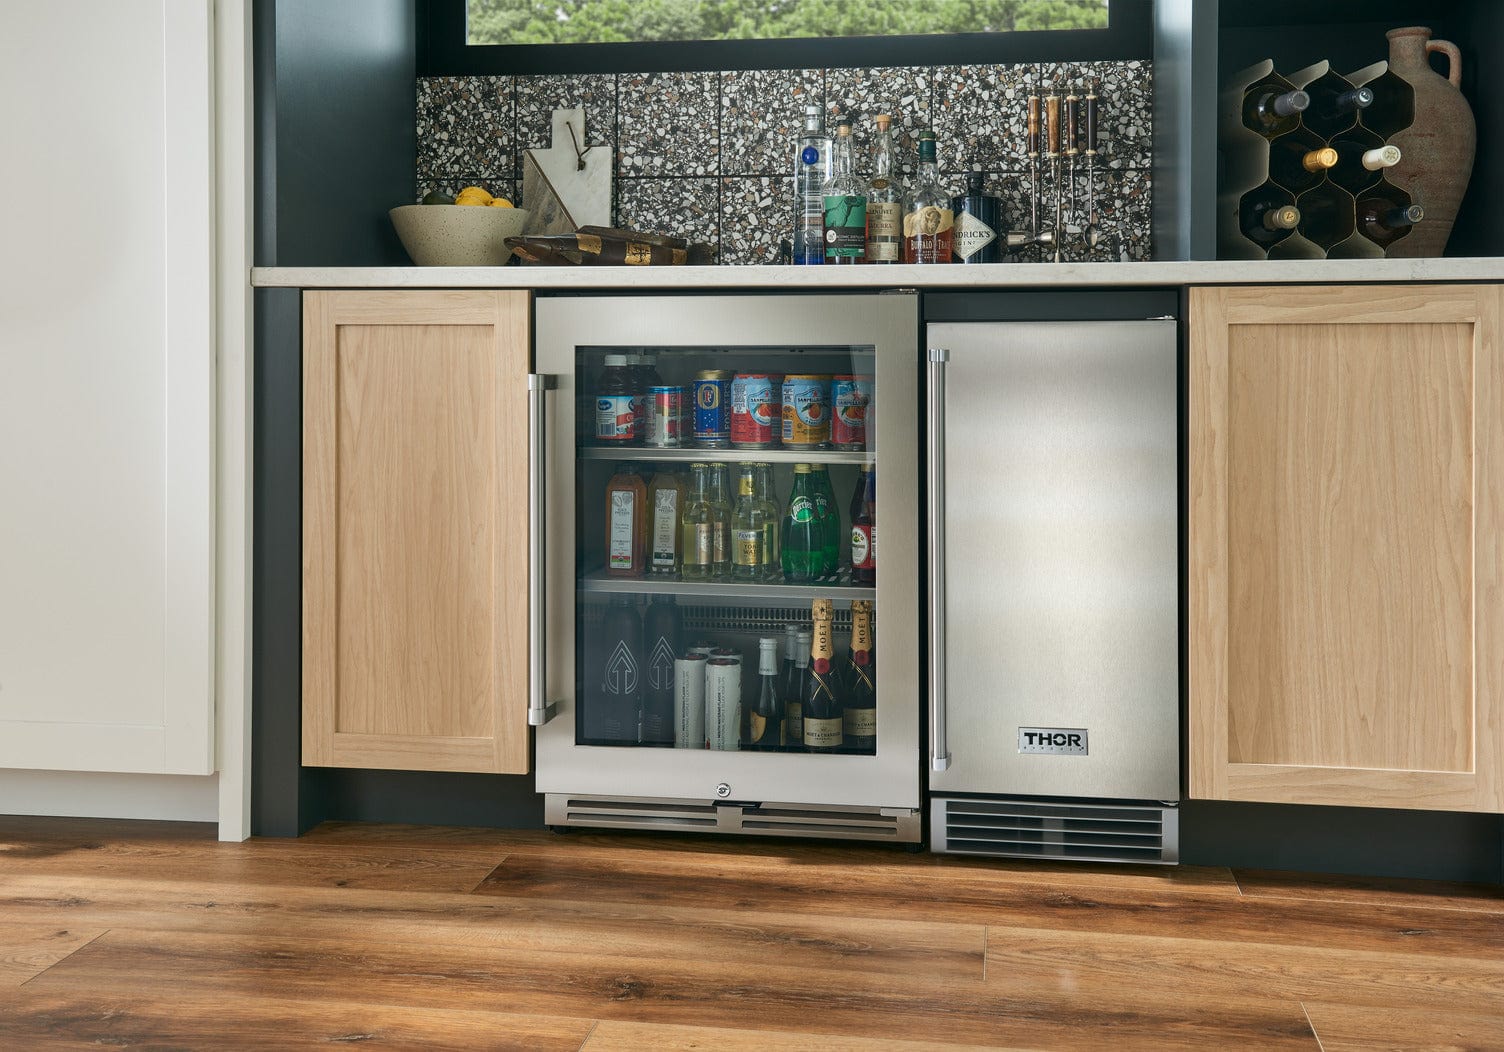 Thor Kitchen 15 Inch Built-in 50 lbs. Ice Maker in Stainless Steel TIM1501 Ice Makers TIM1501 Luxury Appliances Direct